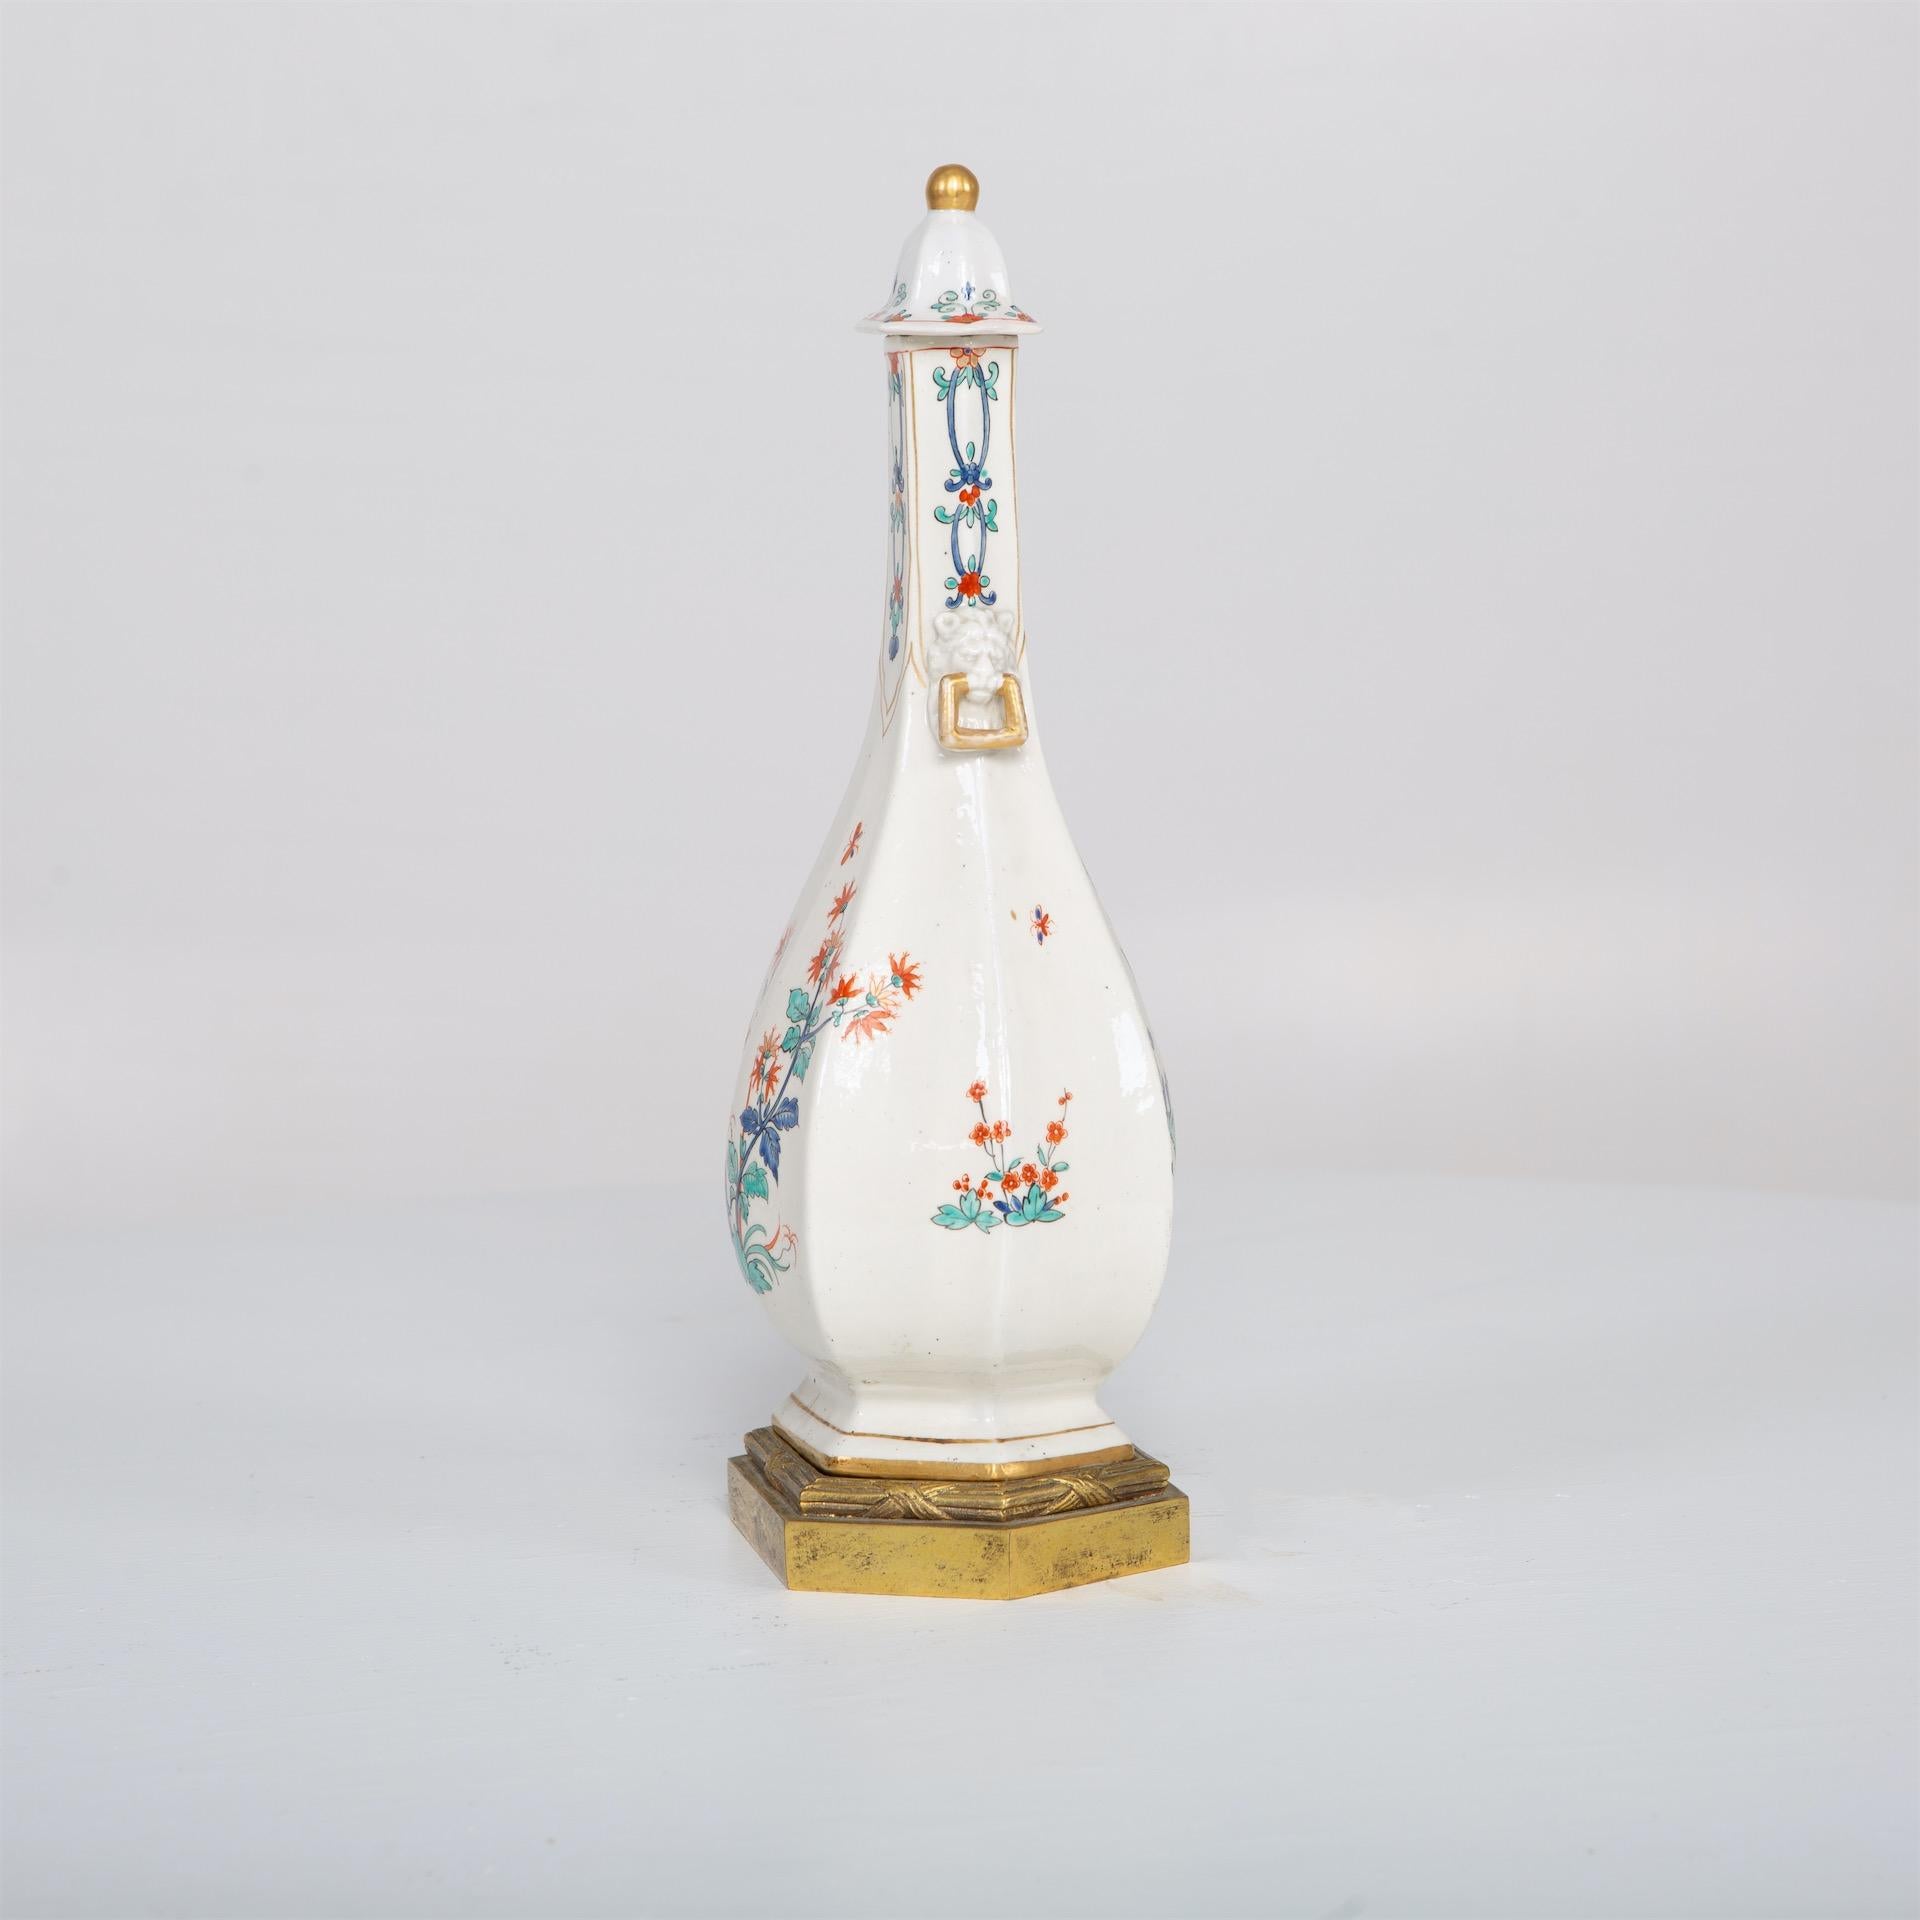 18th Century and Earlier Porcelain Sake Bottle, Probably Chantilly, France, 18th Century